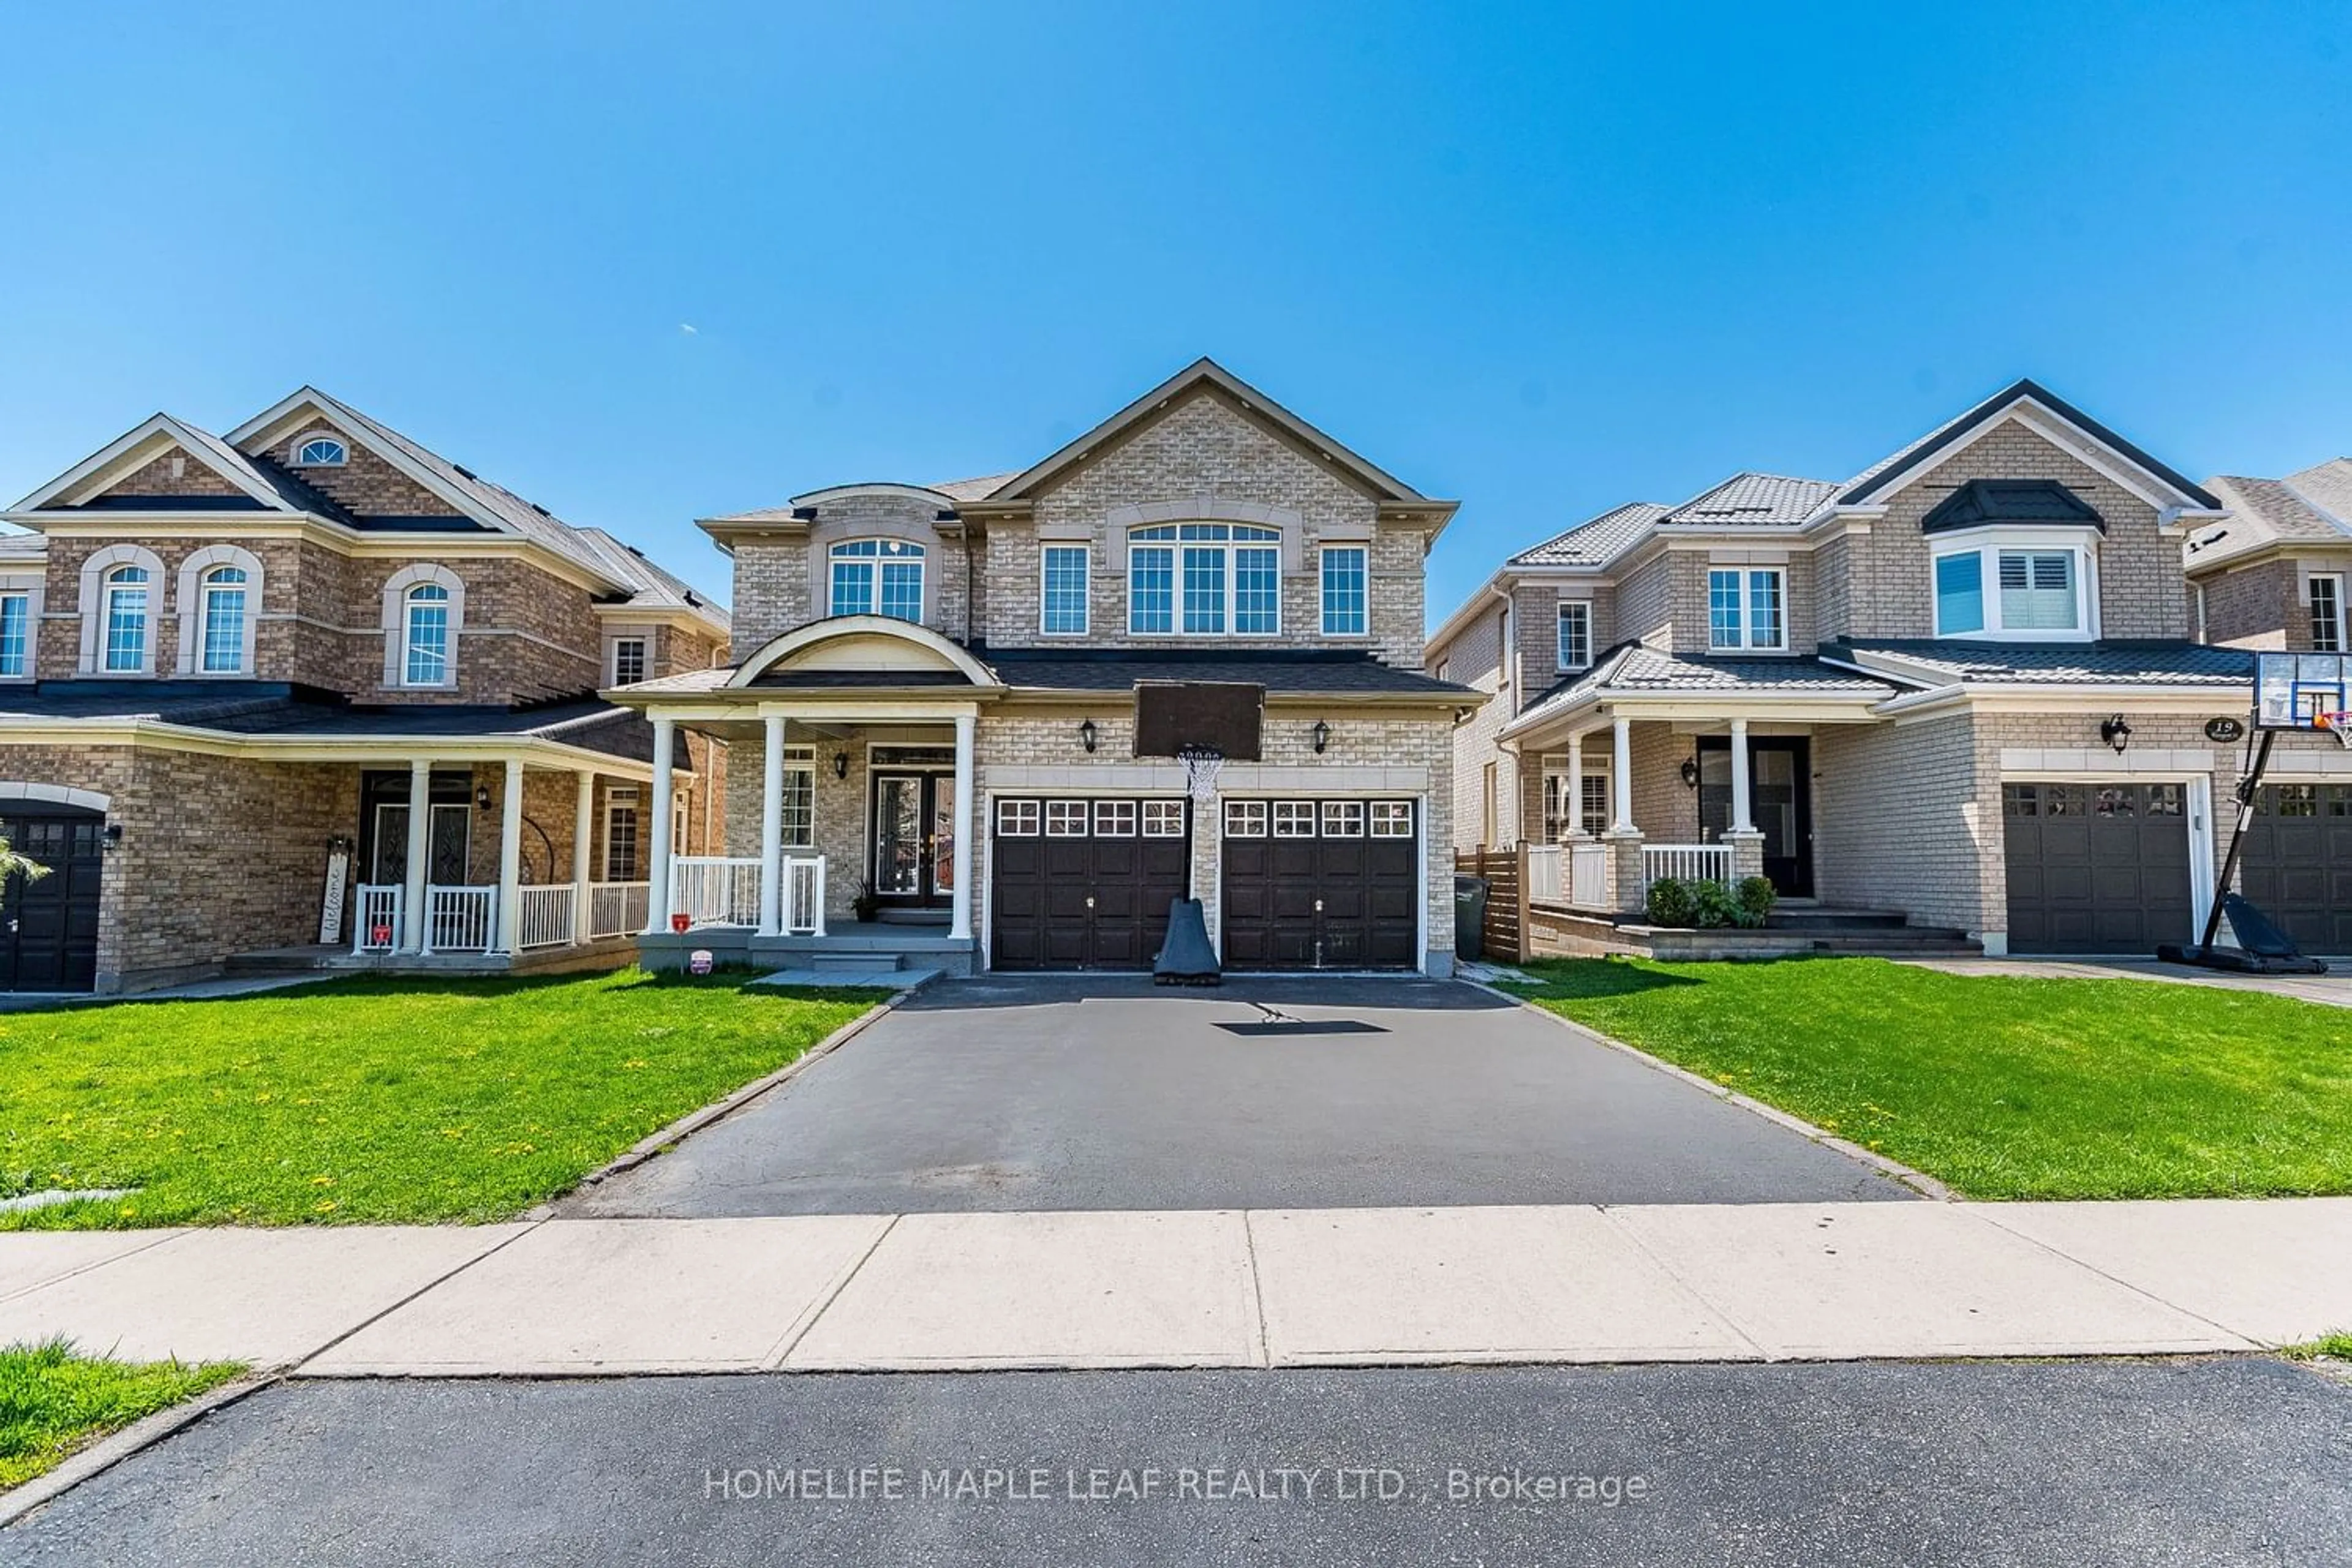 Frontside or backside of a home for 17 Matagami St, Brampton Ontario L6Y 0M9